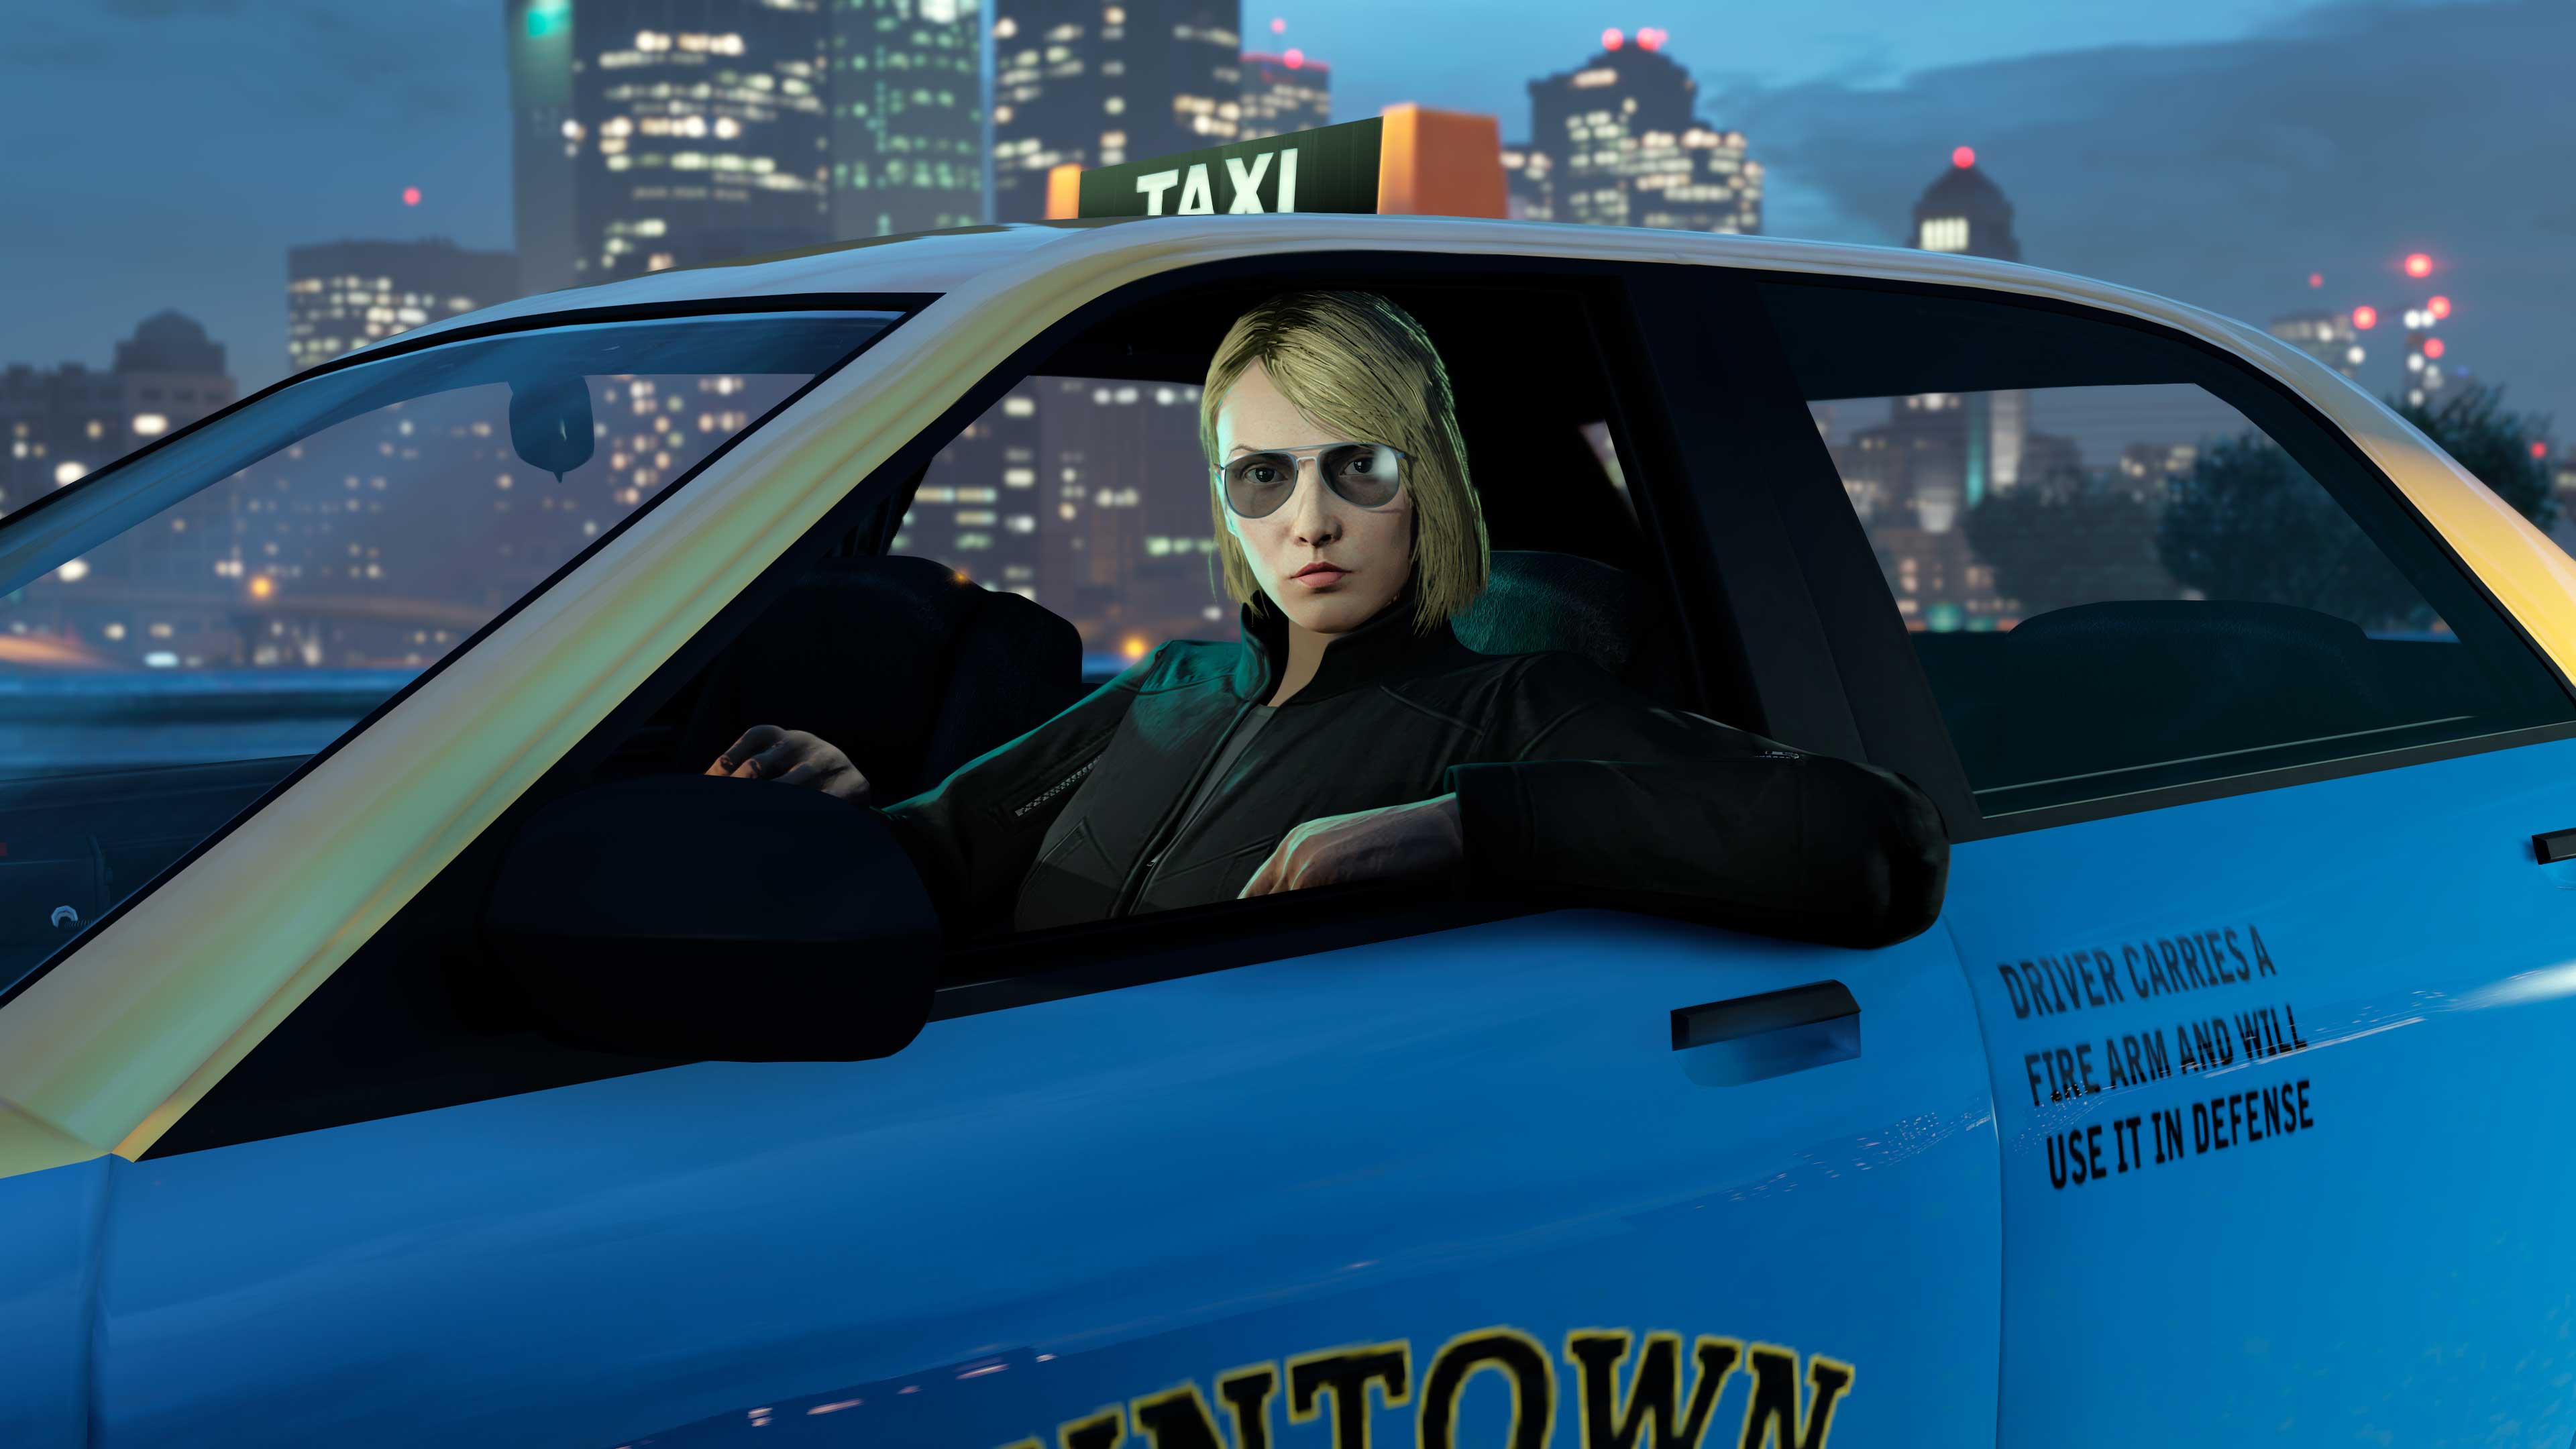 More information about "Taxi Work & Services nu op GTA Online"